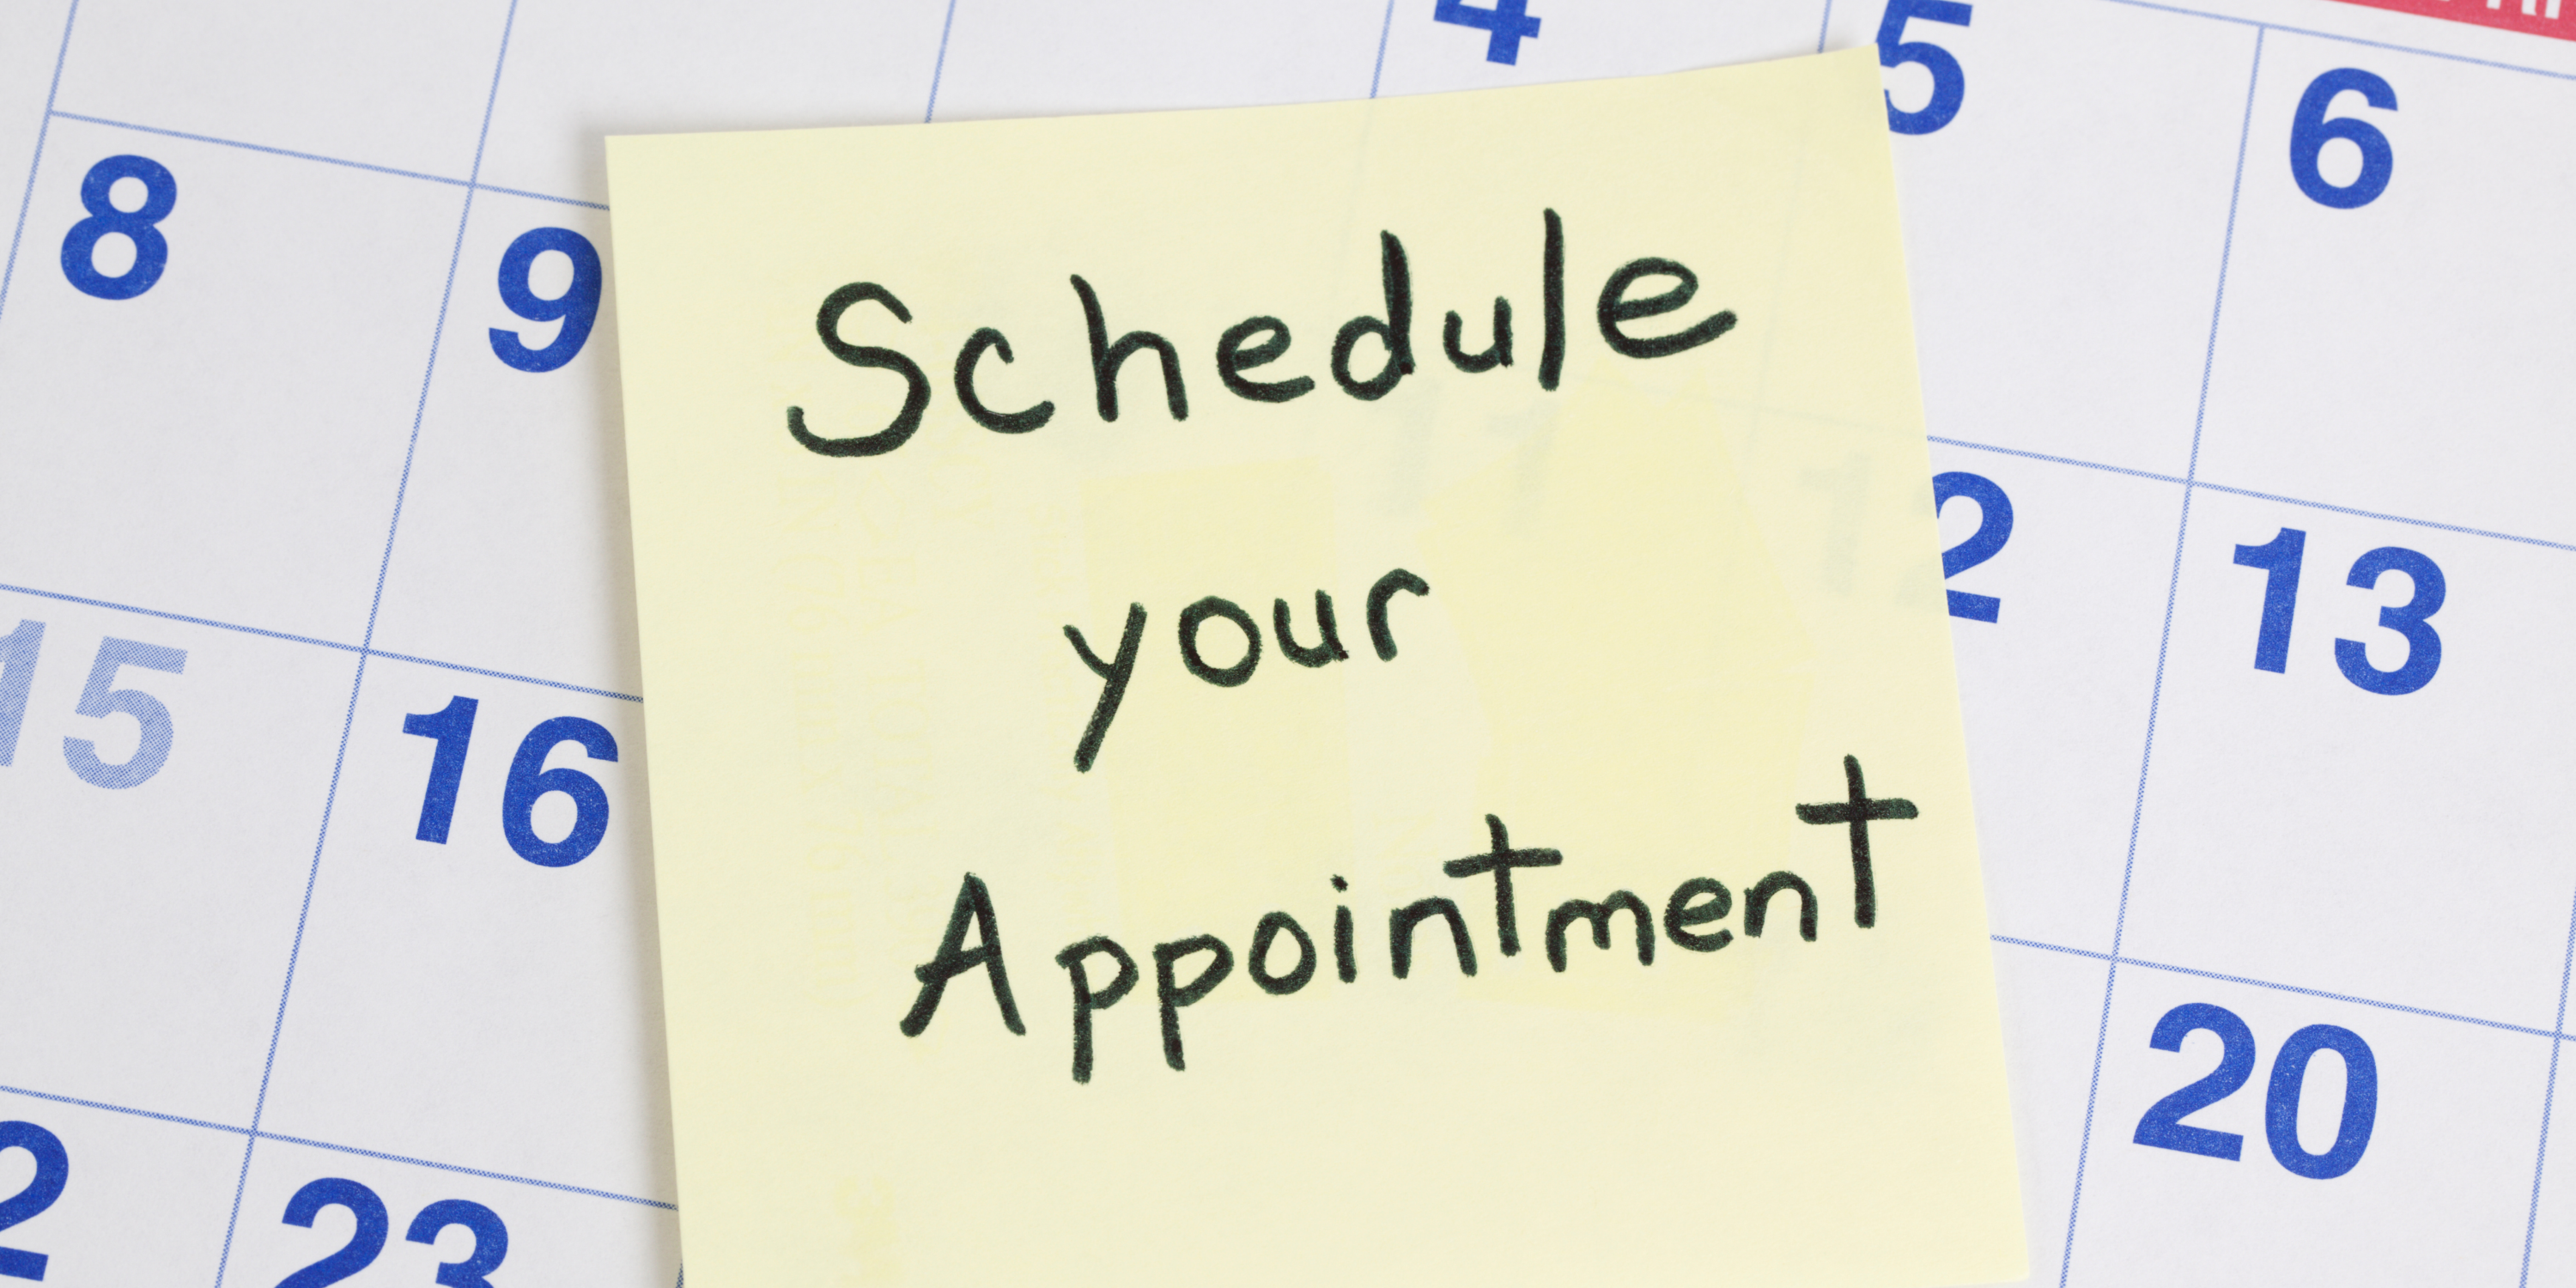 Why some patients like being able to schedule appointments online